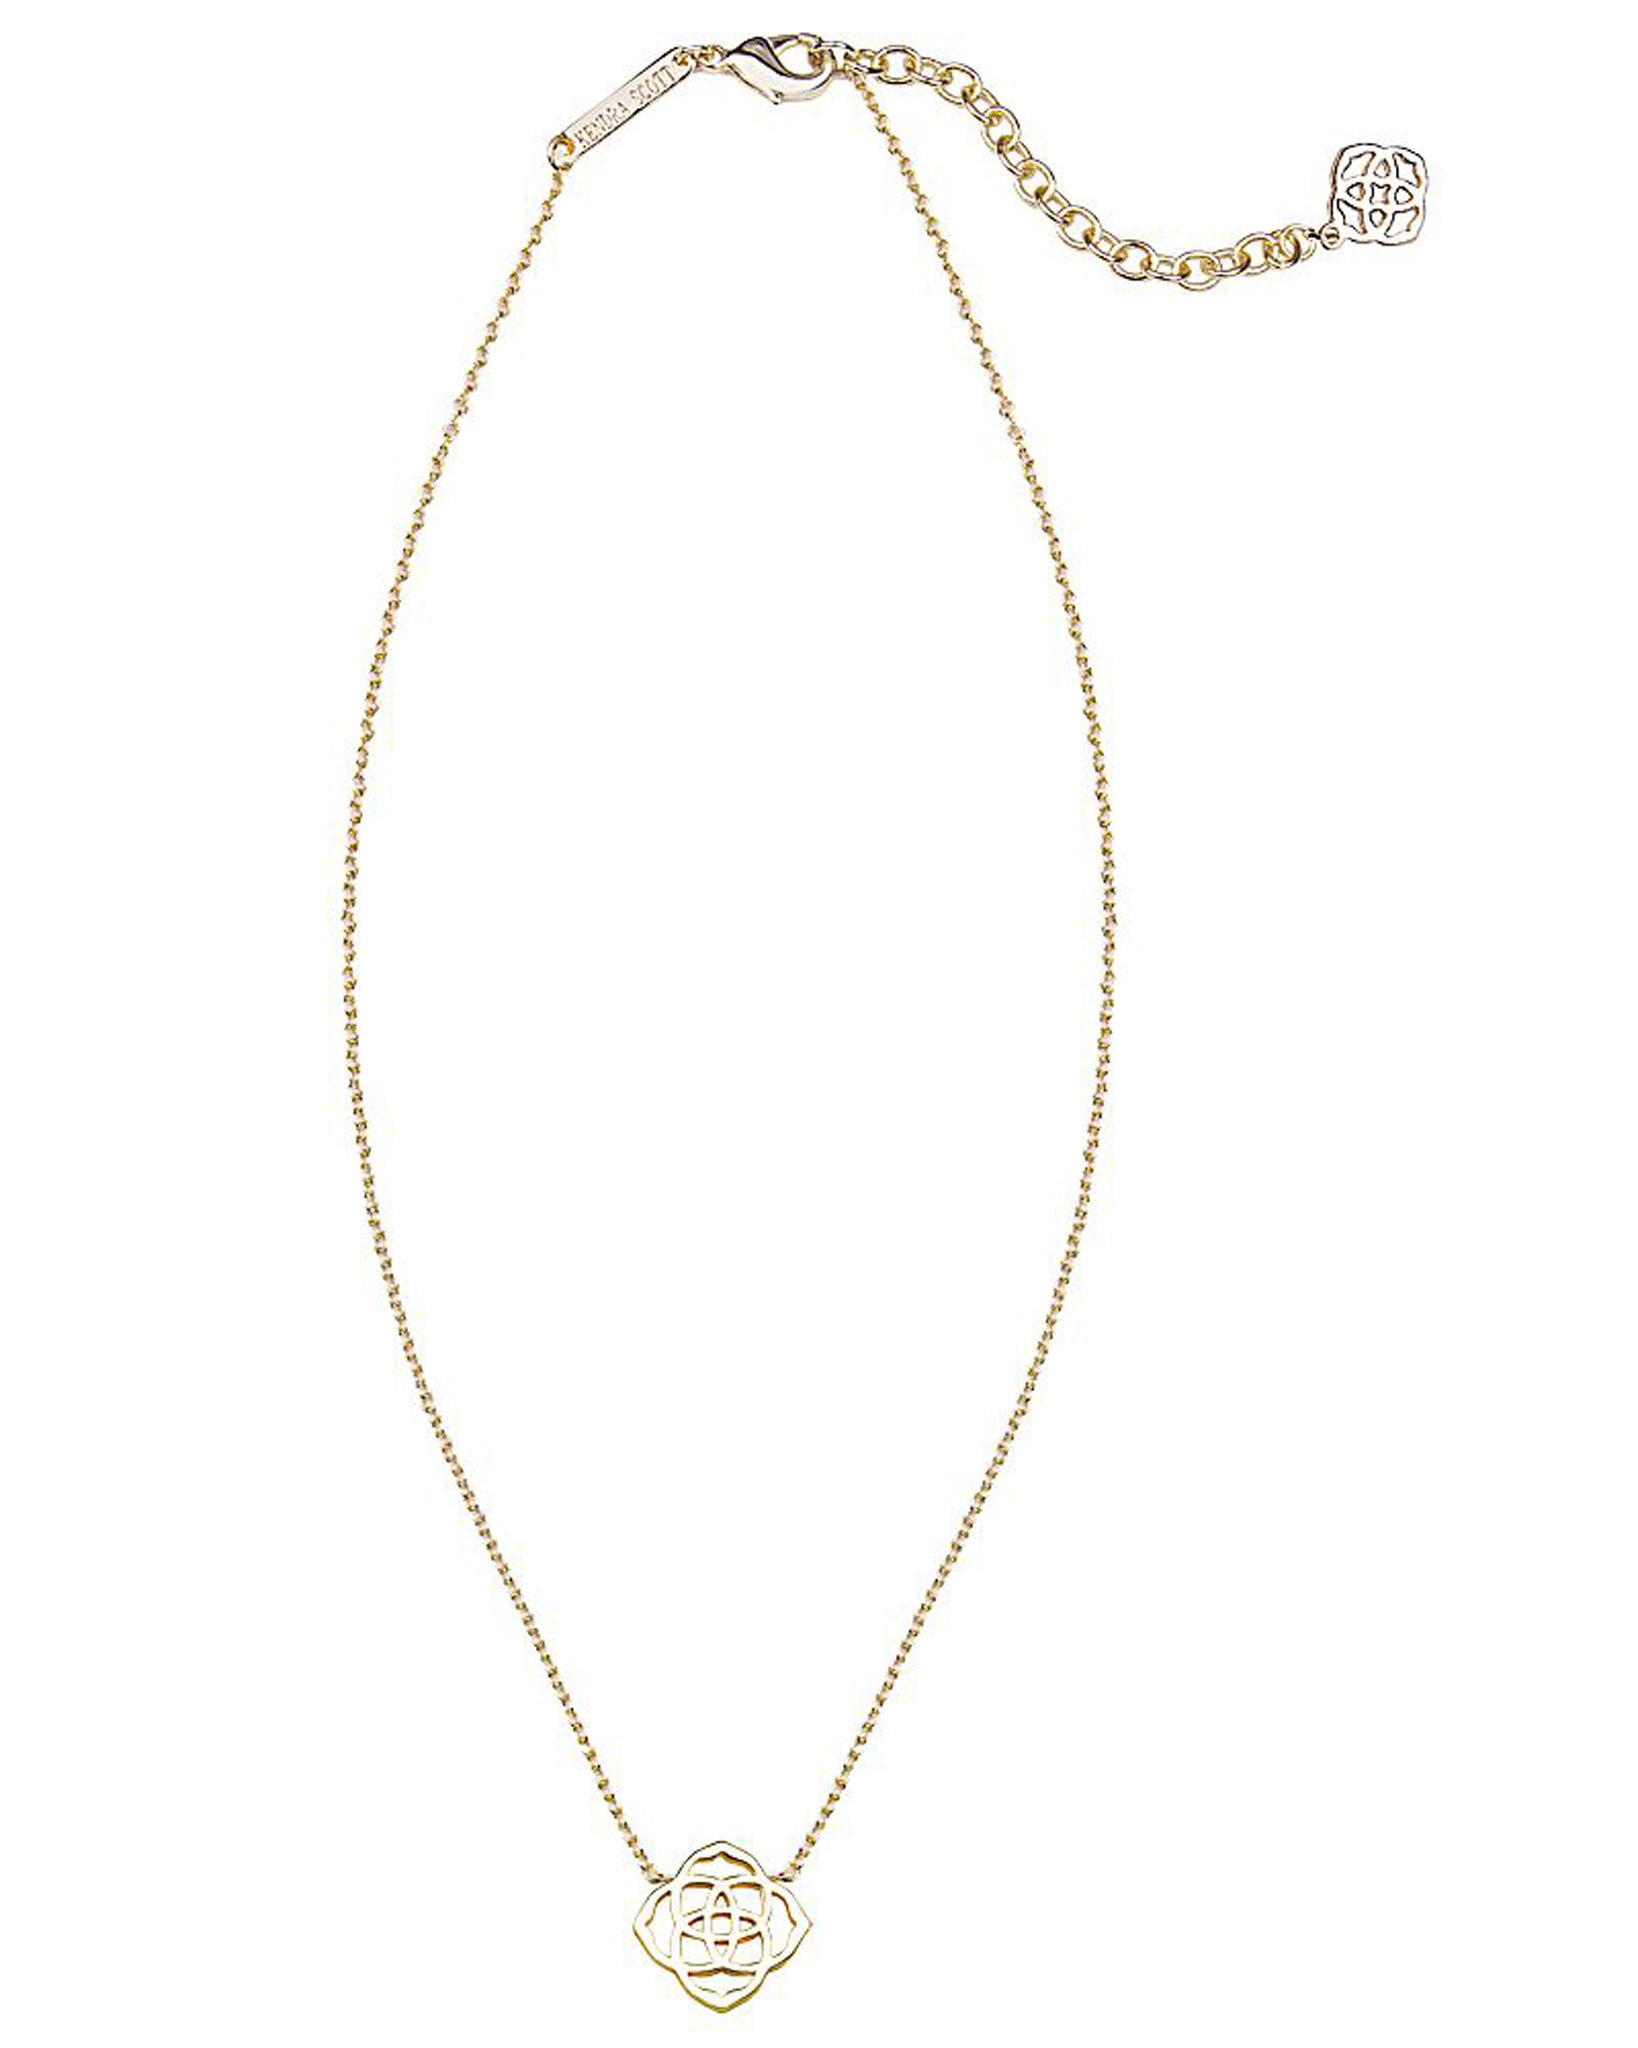 Kendra Scott Decklyn Logo Pendant Necklace in Gold Plated